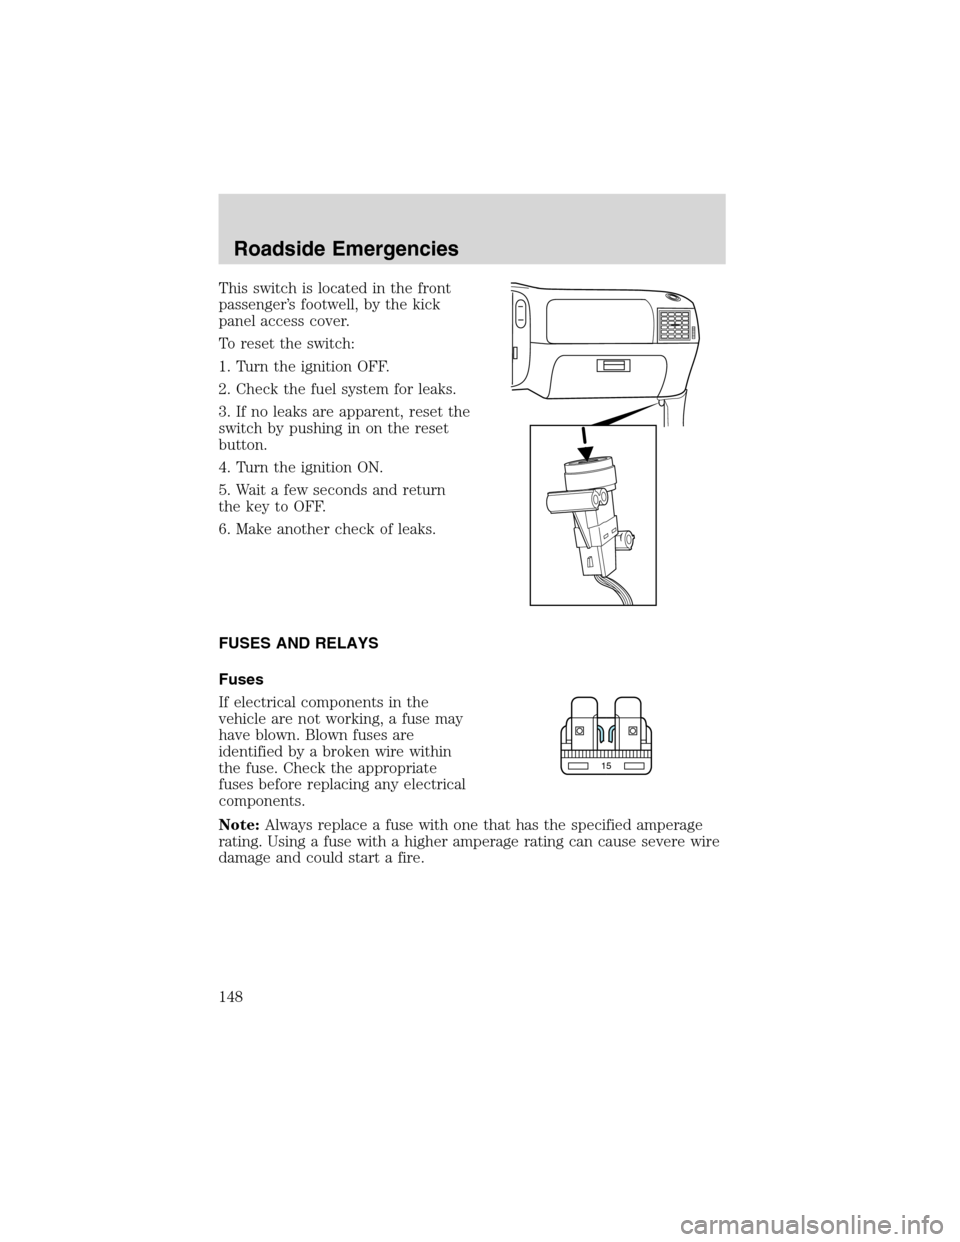 FORD RANGER 2003 2.G Owners Manual This switch is located in the front
passenger’s footwell, by the kick
panel access cover.
To reset the switch:
1. Turn the ignition OFF.
2. Check the fuel system for leaks.
3. If no leaks are appare